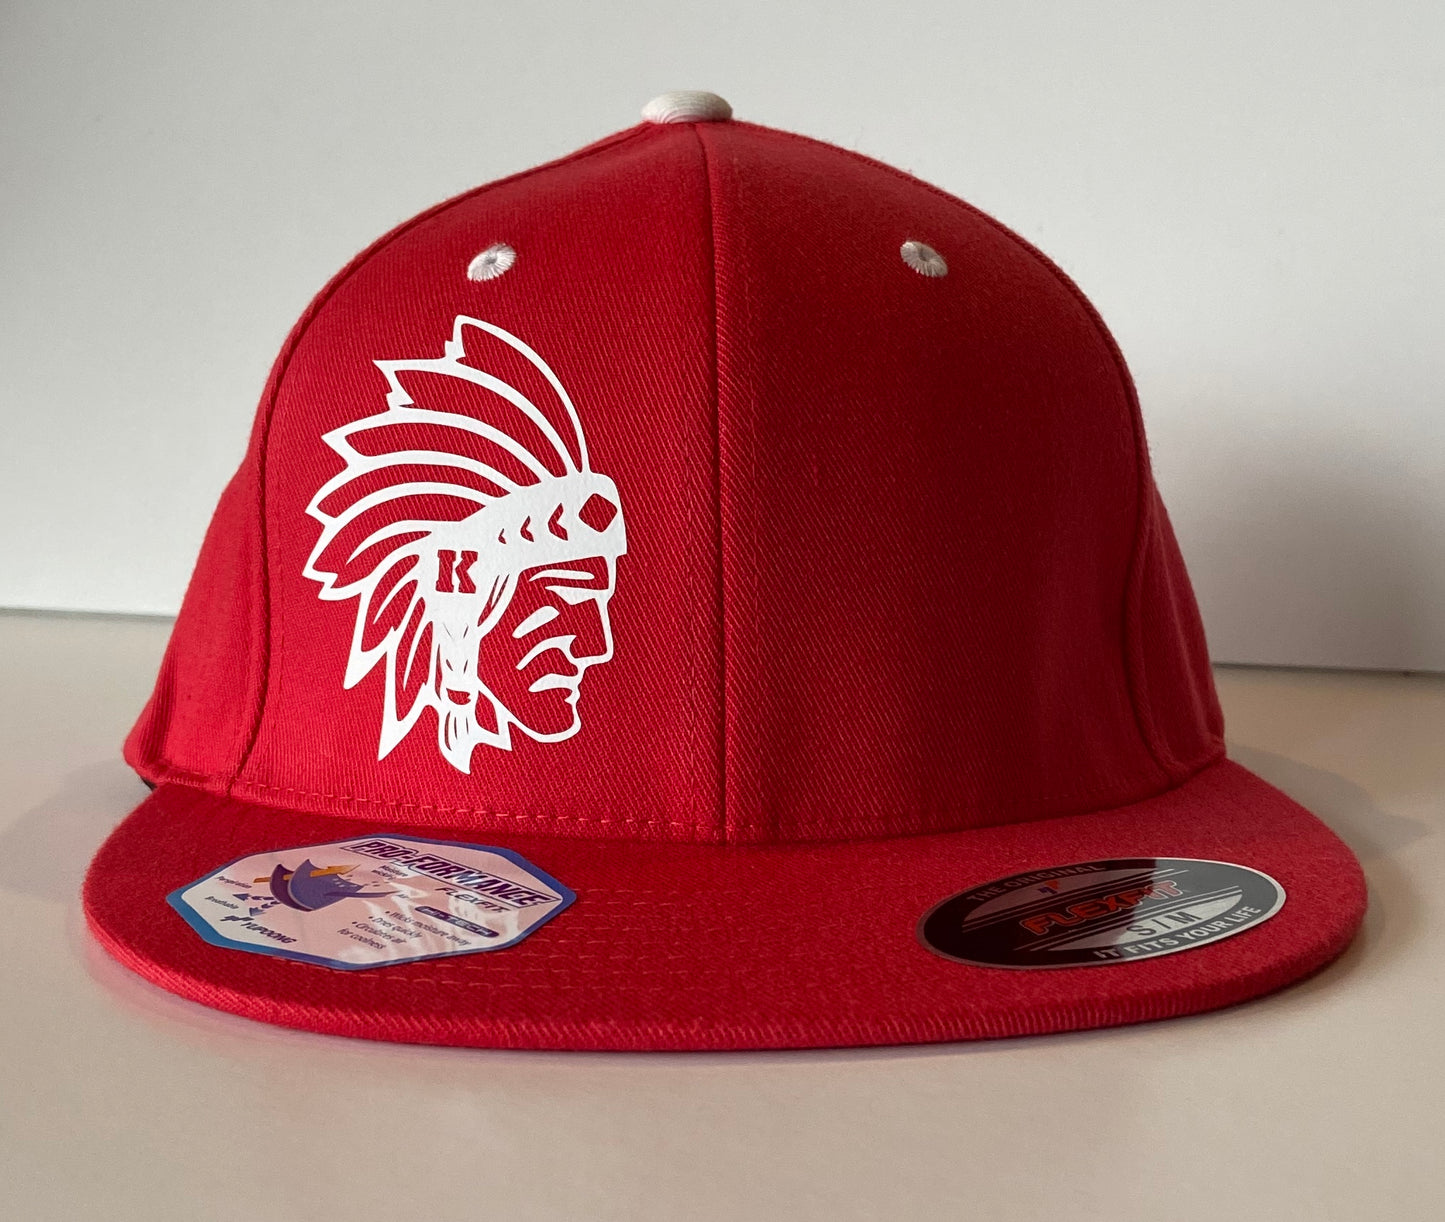 Knox Redskins FlexFit Fitted Hat - Fitted size L/XL or S/M - Red and White